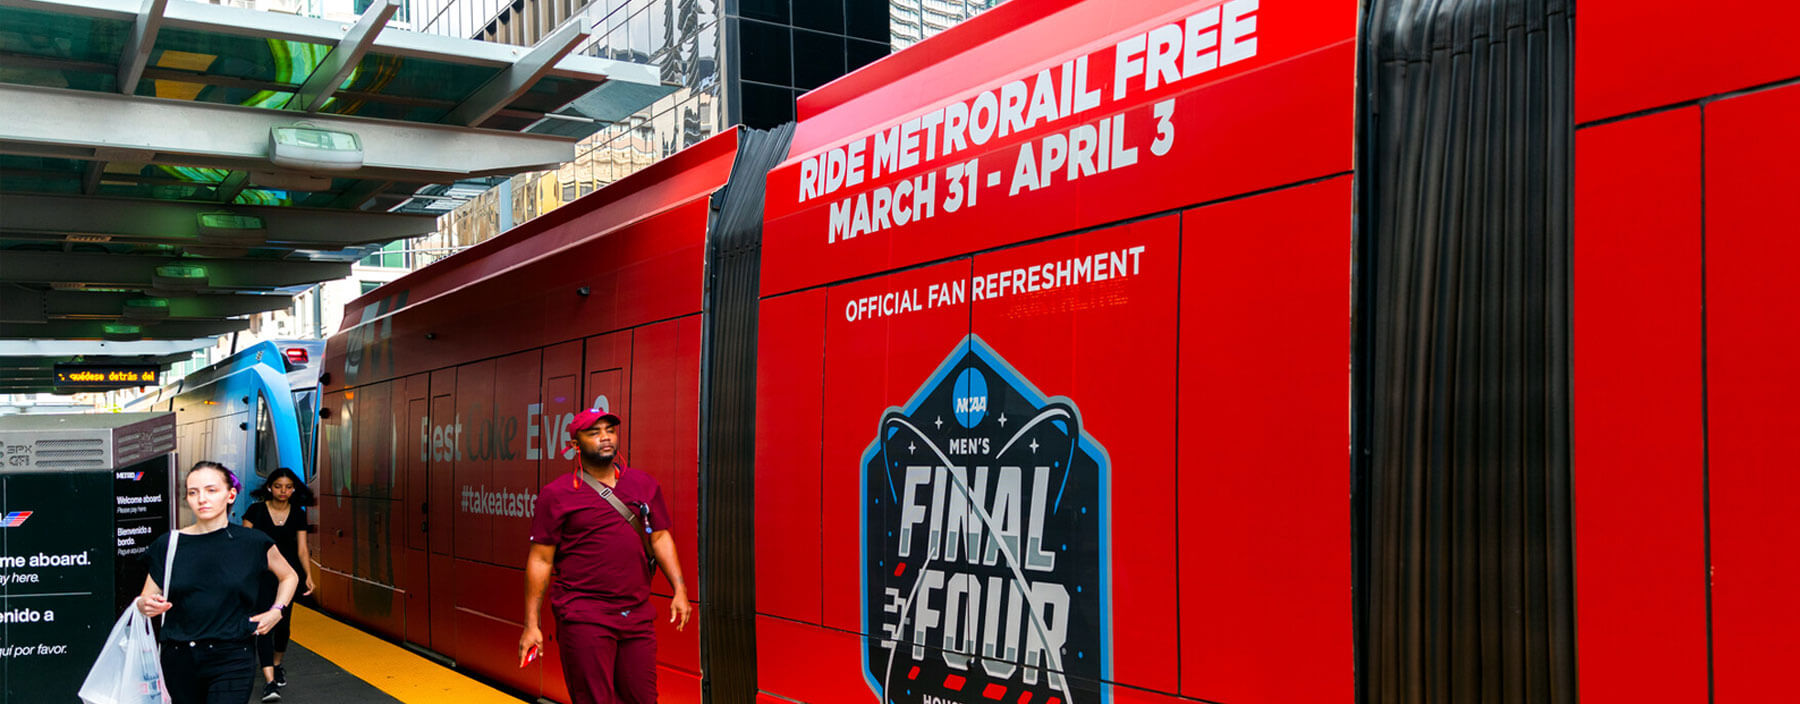 Ride Free on METRORail Red Line to Final Four